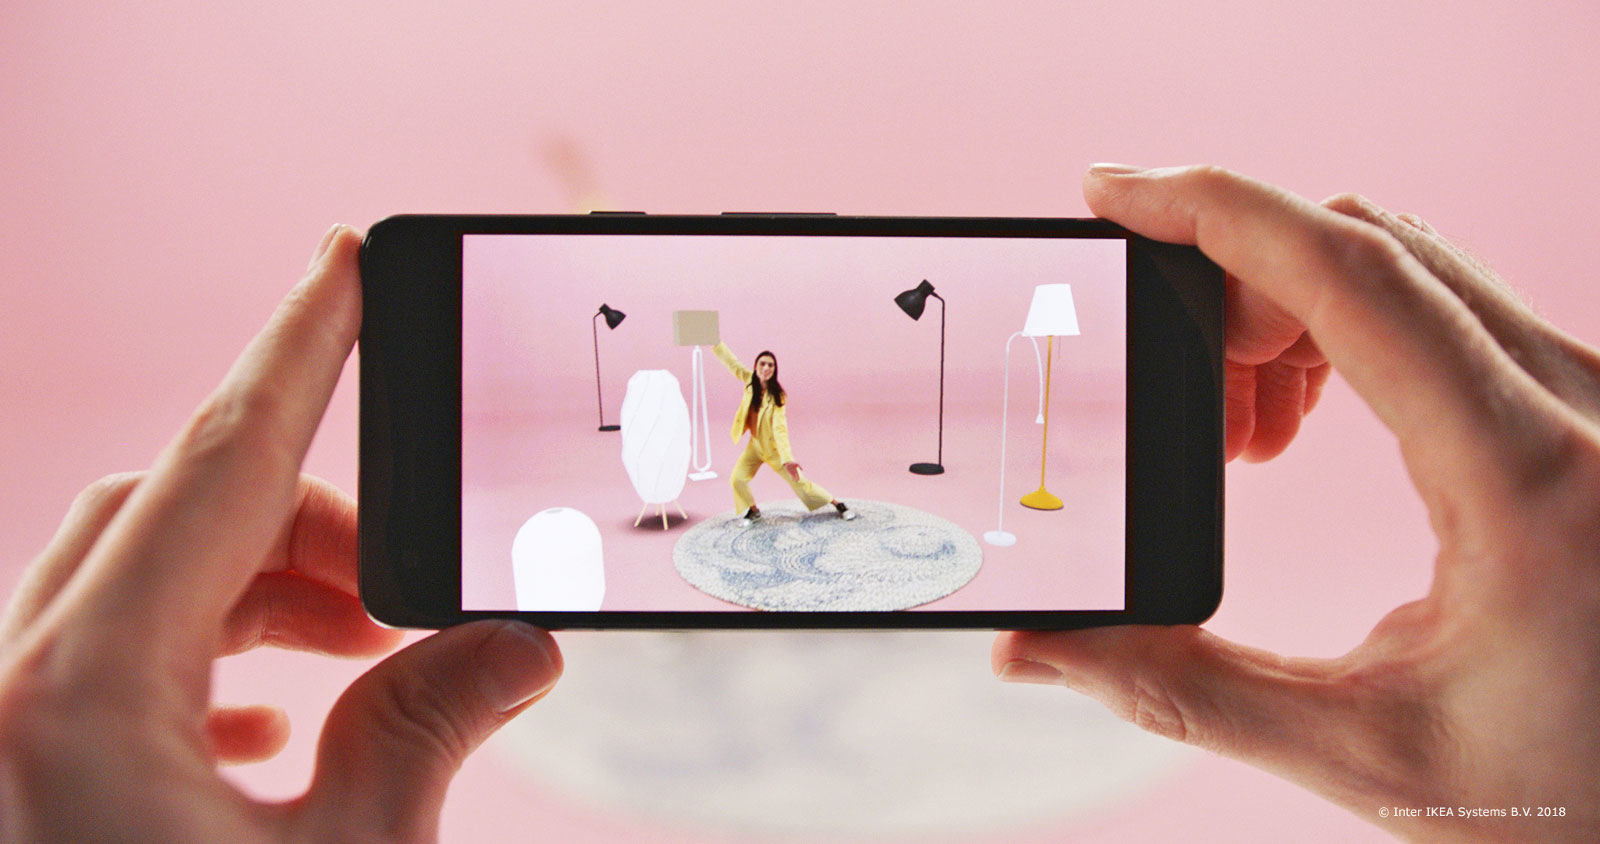 IKEA has released an app in the augmented reality of IKEA Place for Android